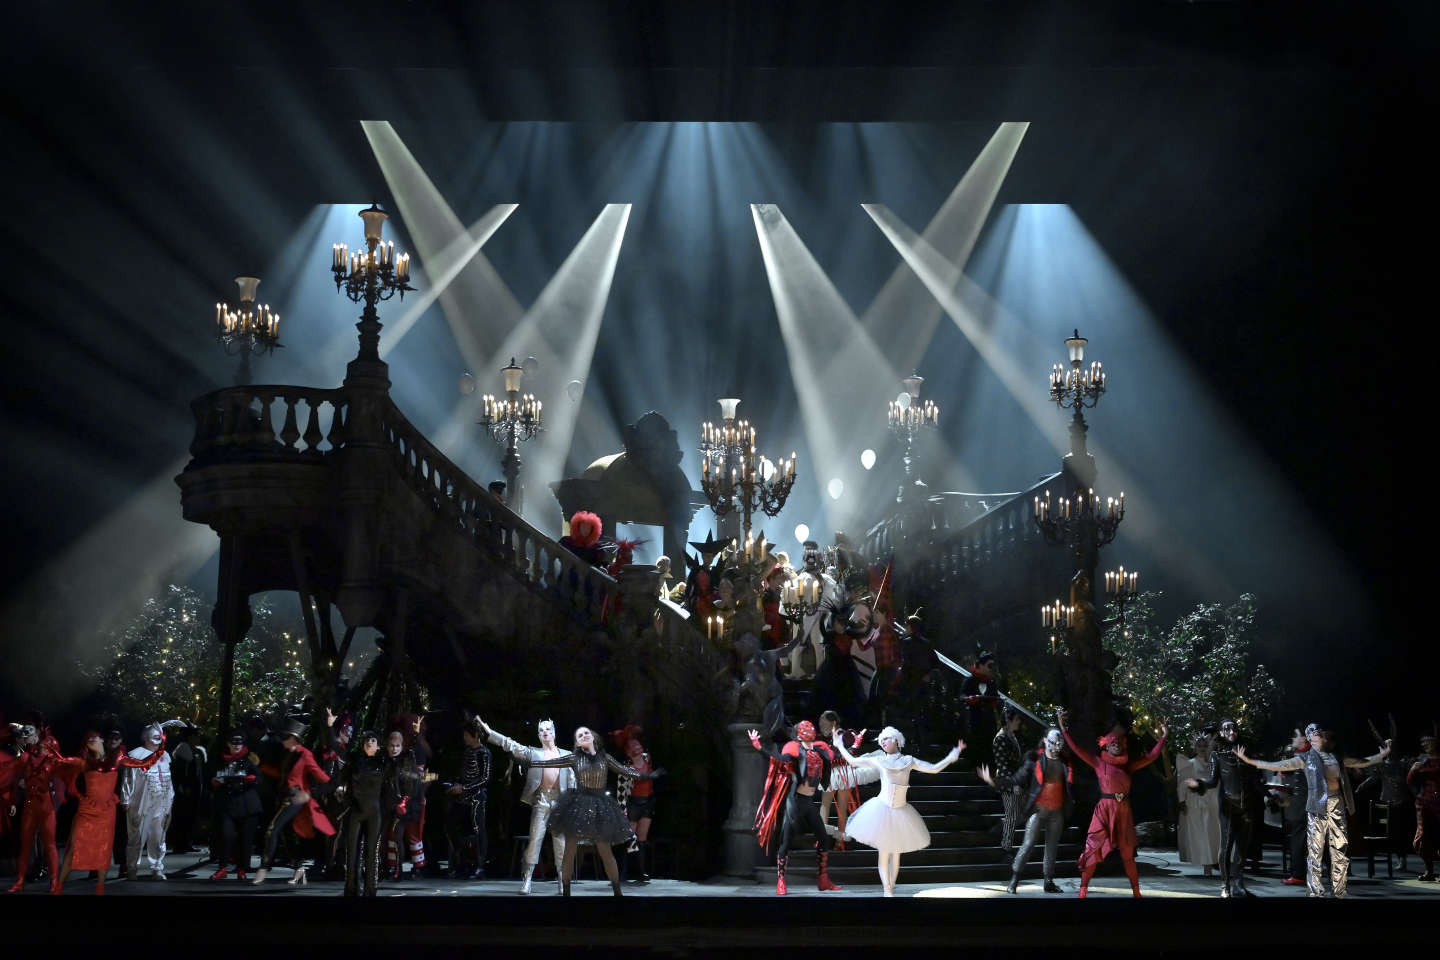 “Romeo and Juliet” in the spectacular setting of Thomas Jolly at the Opéra Bastille